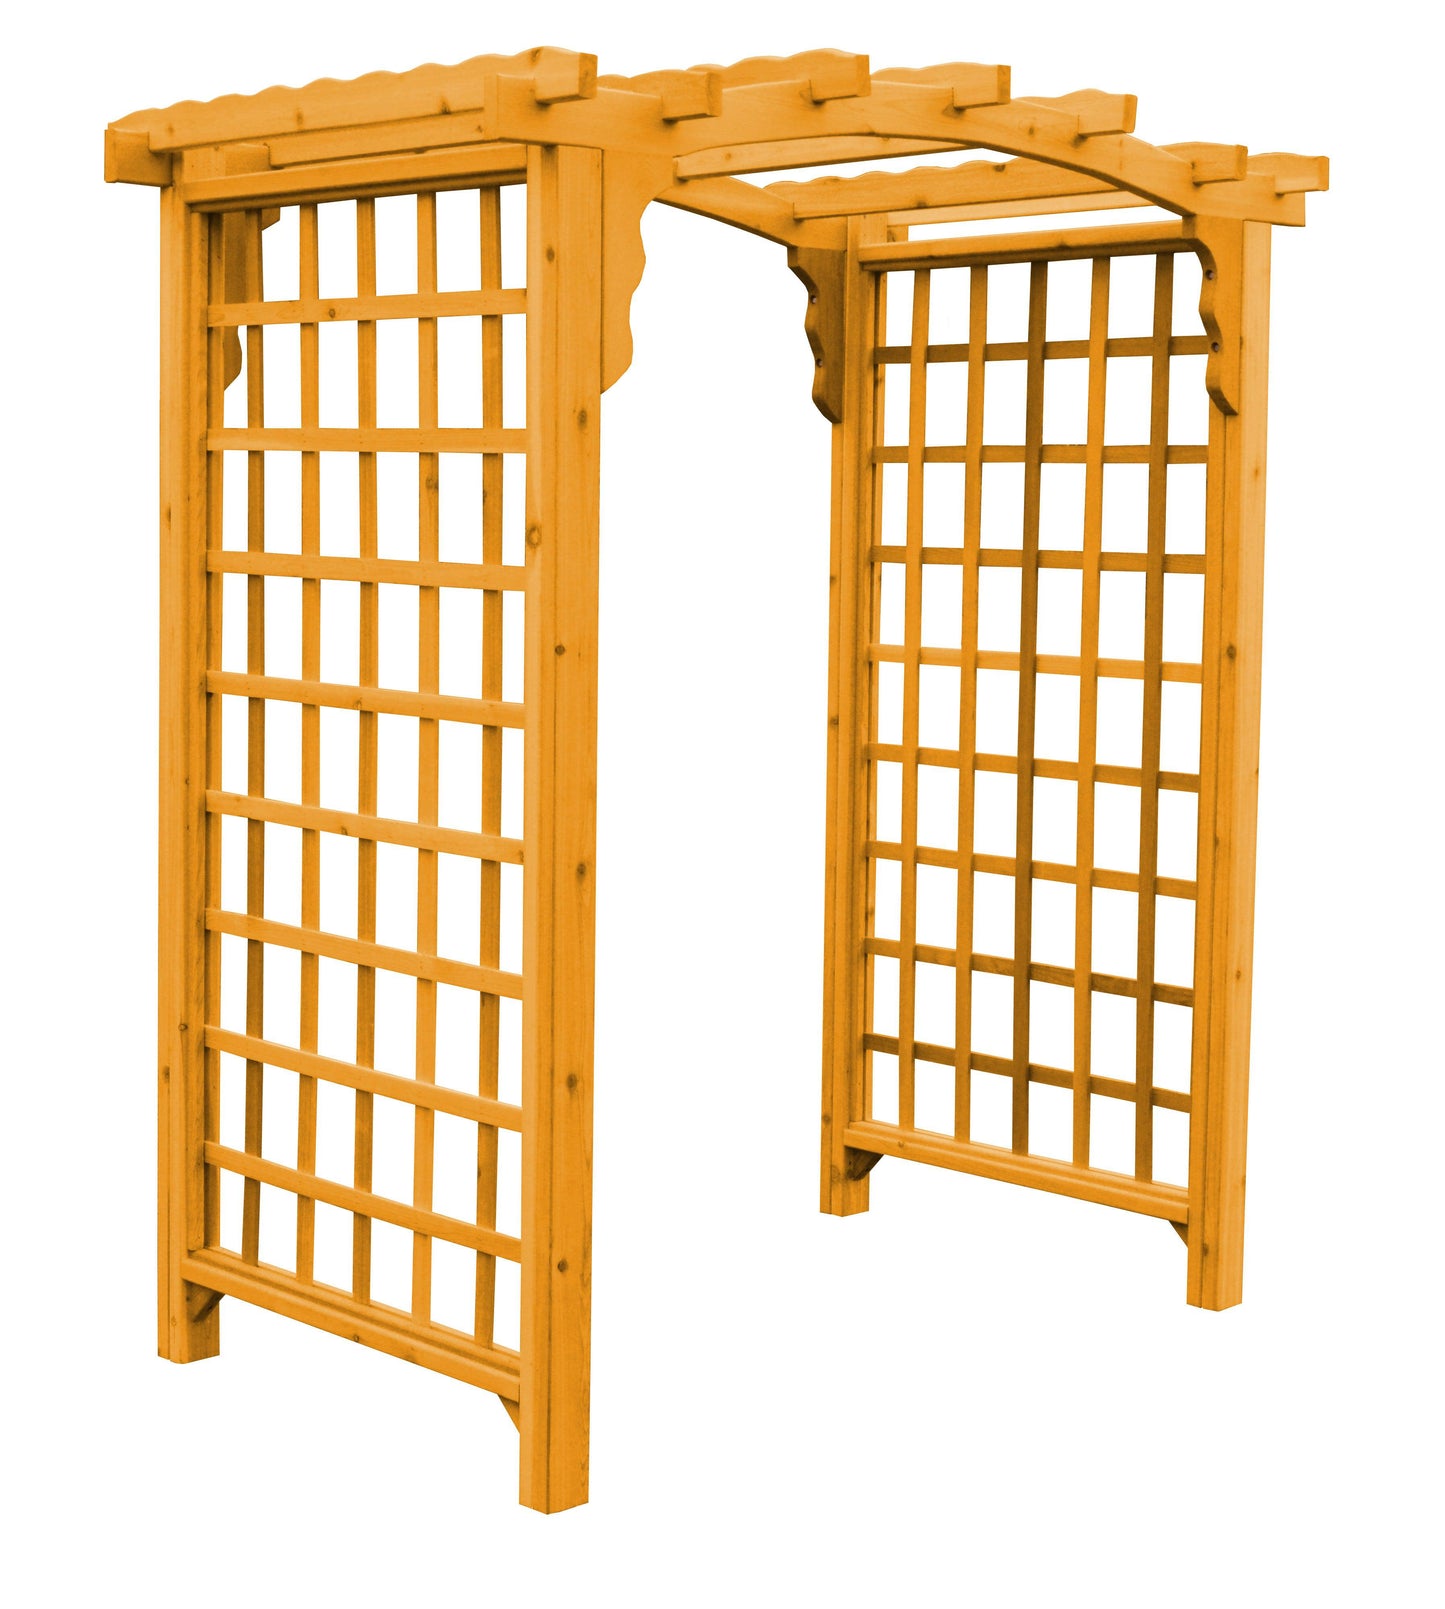 A&L Furniture Co. Western Red Cedar 6' Cambridge Arbor - LEAD TIME TO SHIP 4 WEEKS OR LESS